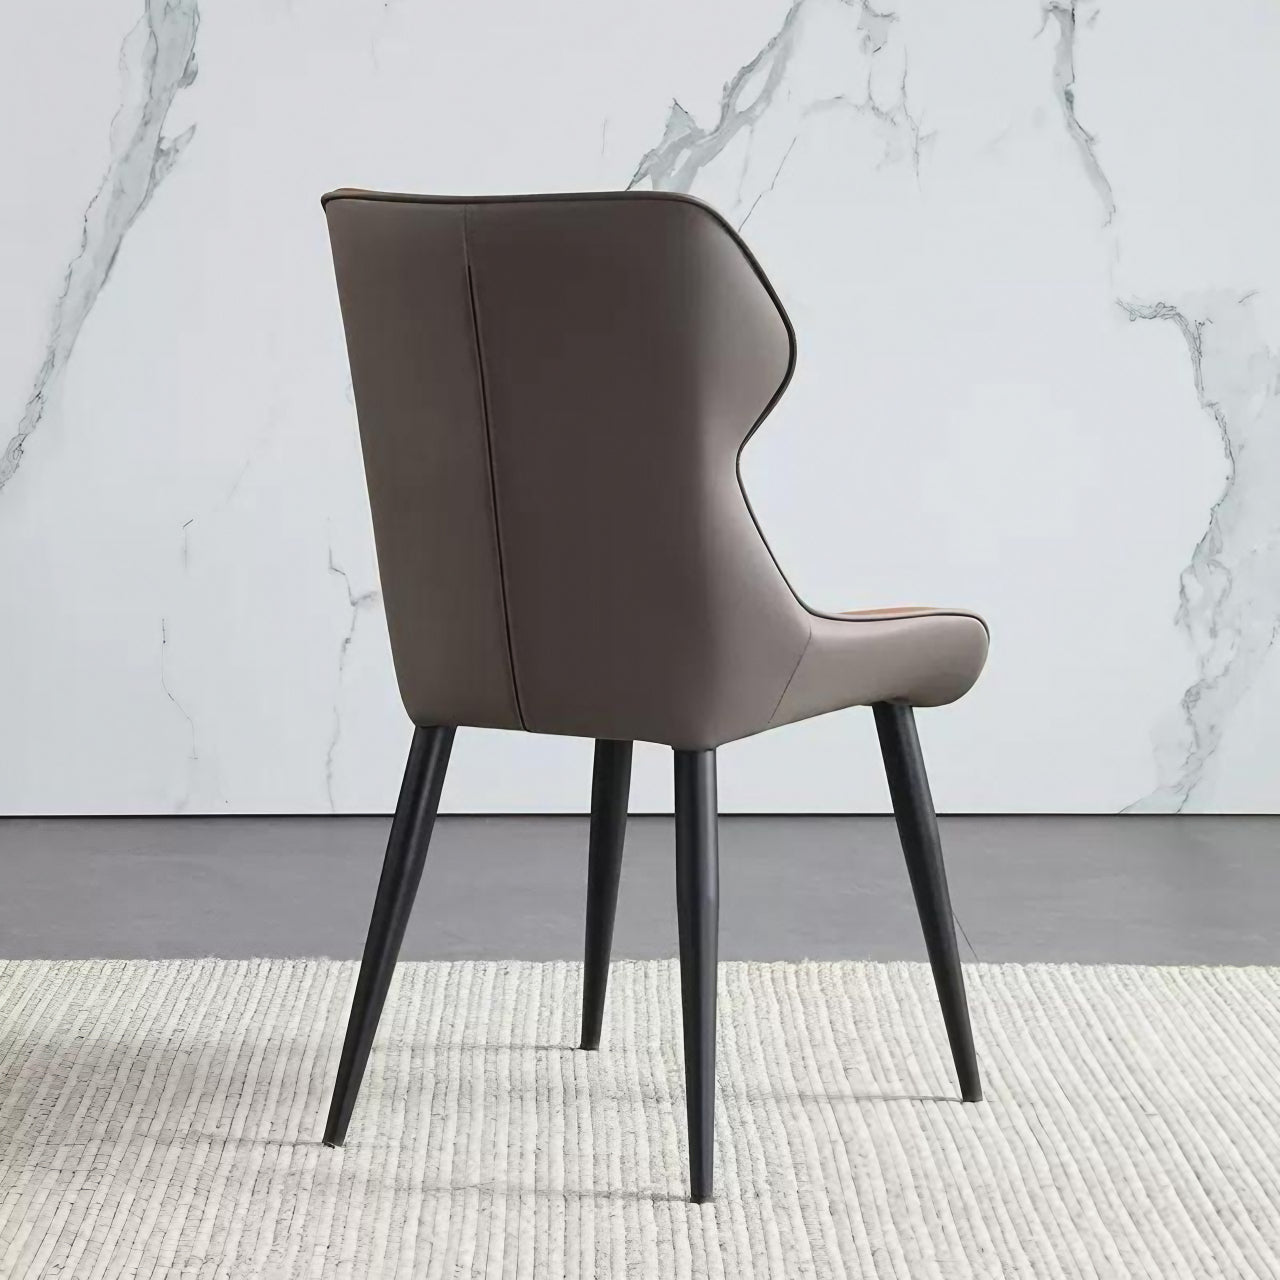 Luxurious Light Grey High-Back Leather Dining Chair in Minimalist Design